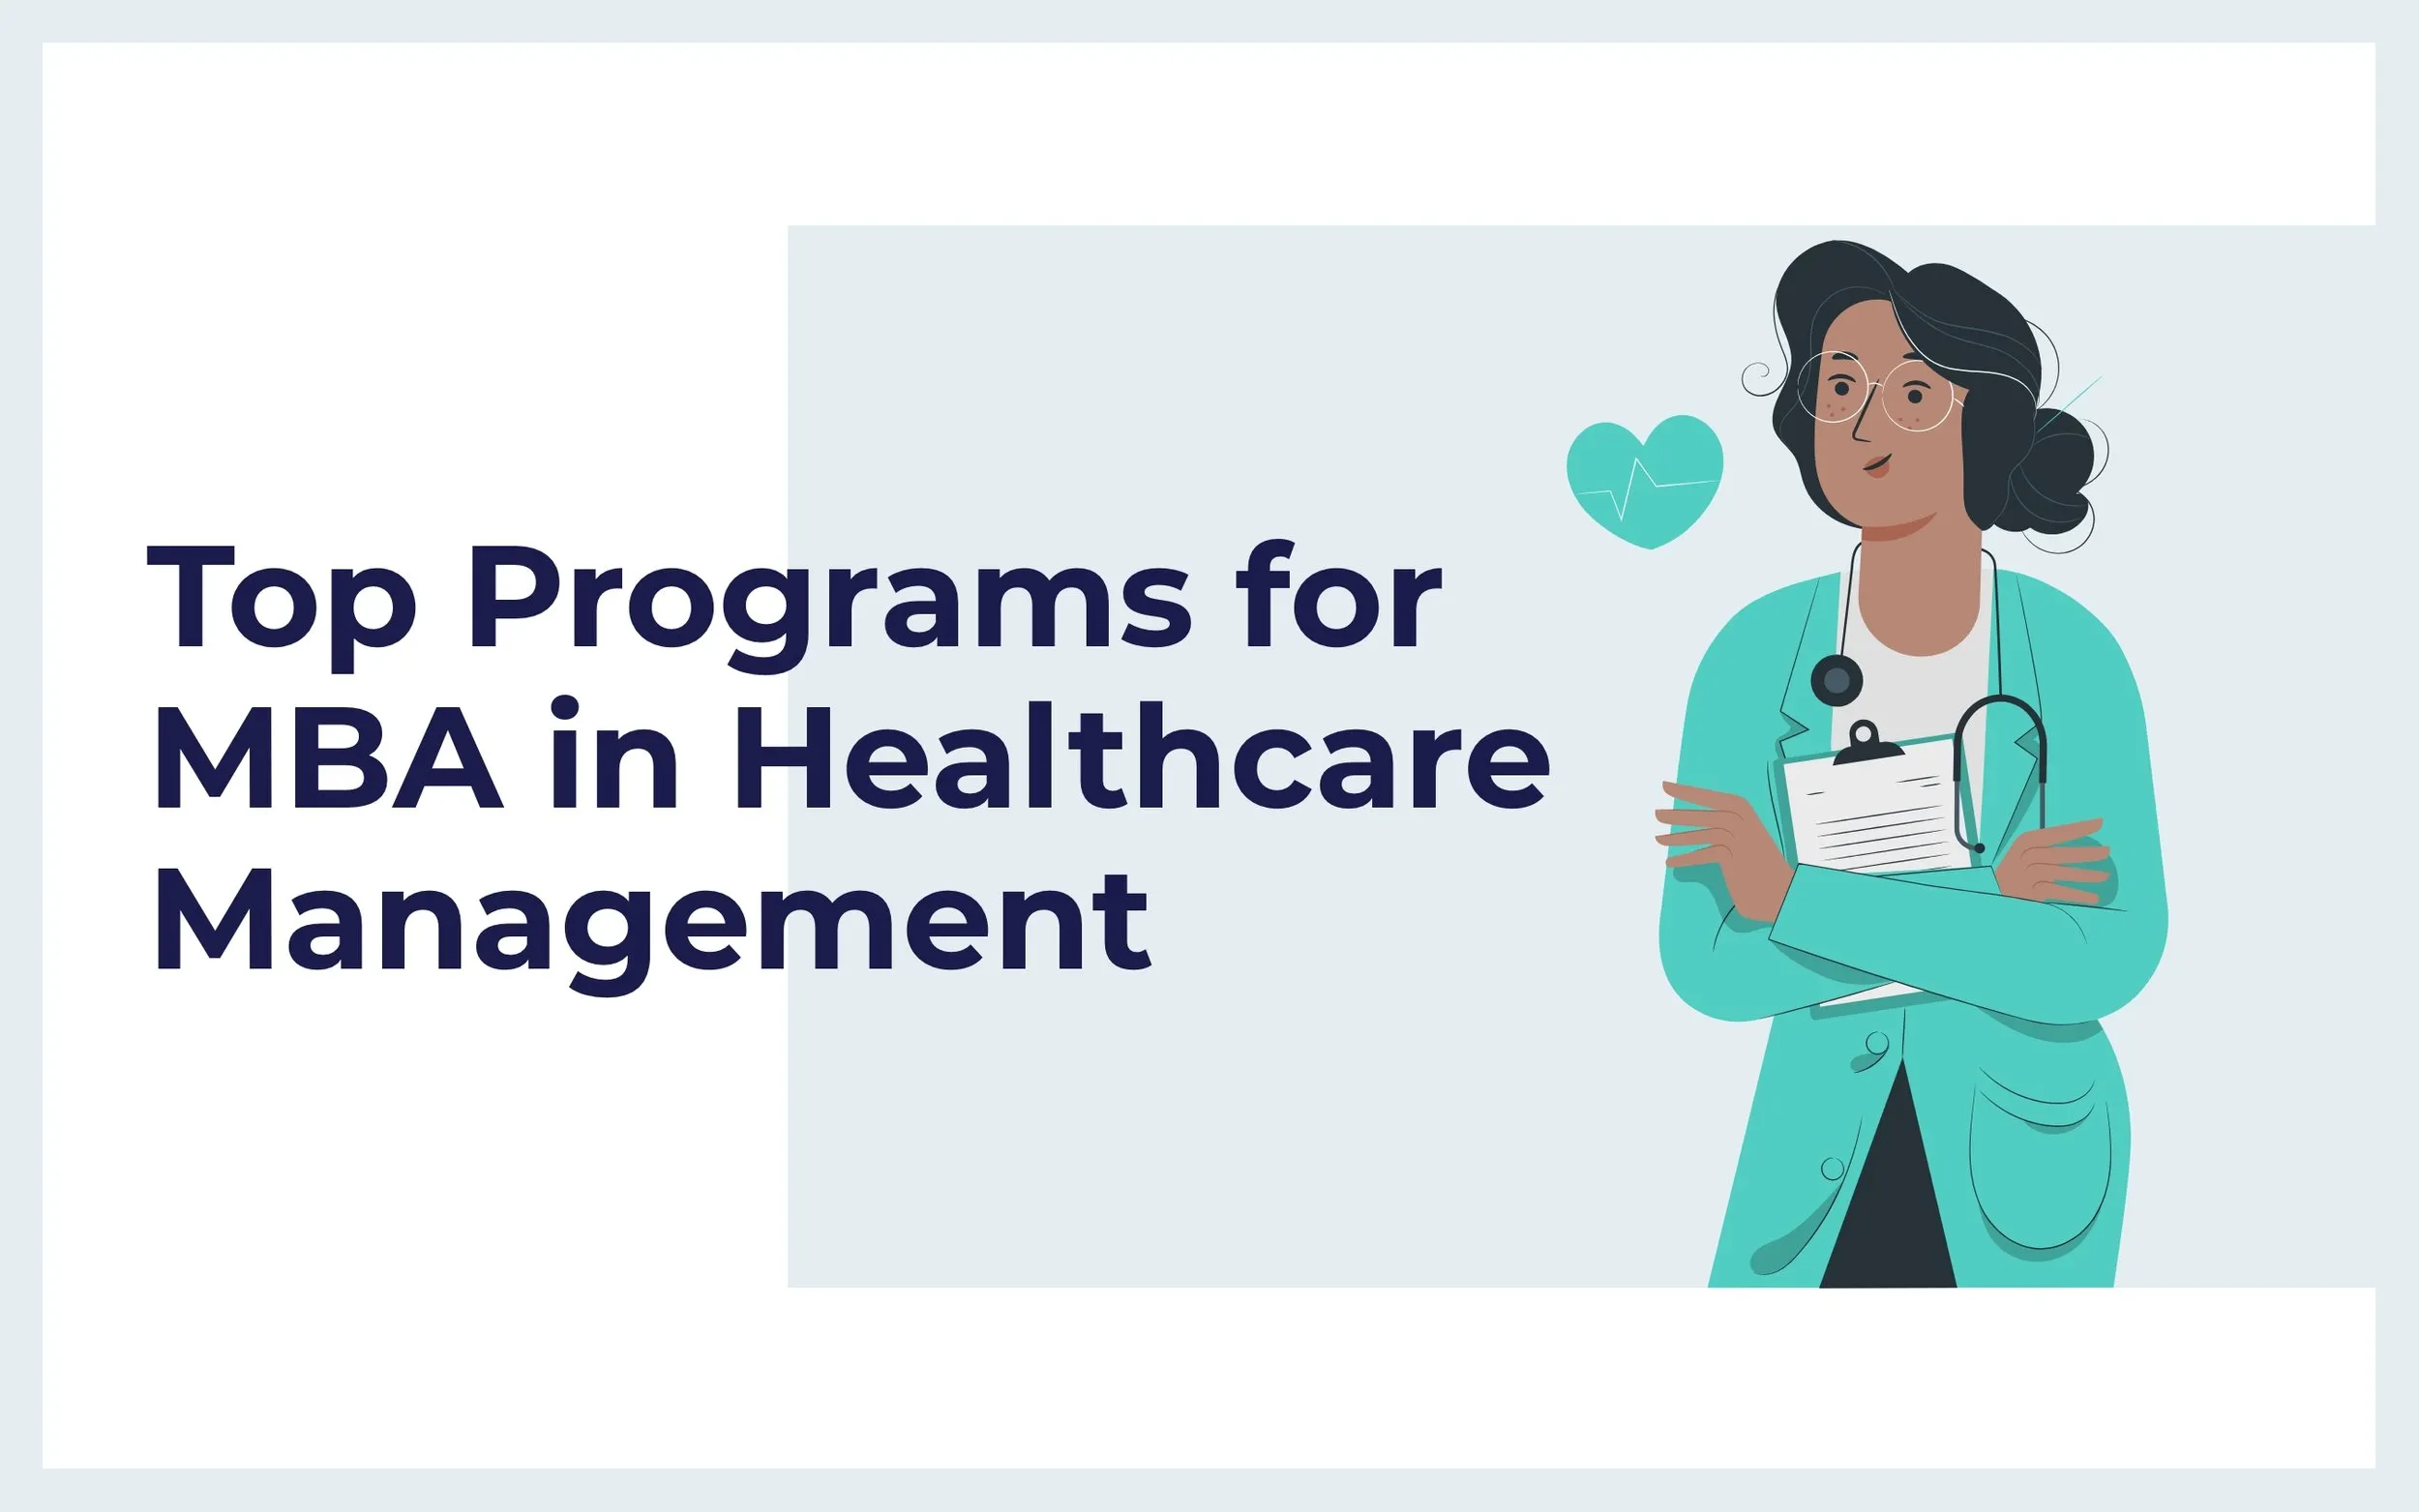 Top Programs for MBA in Healthcare Management